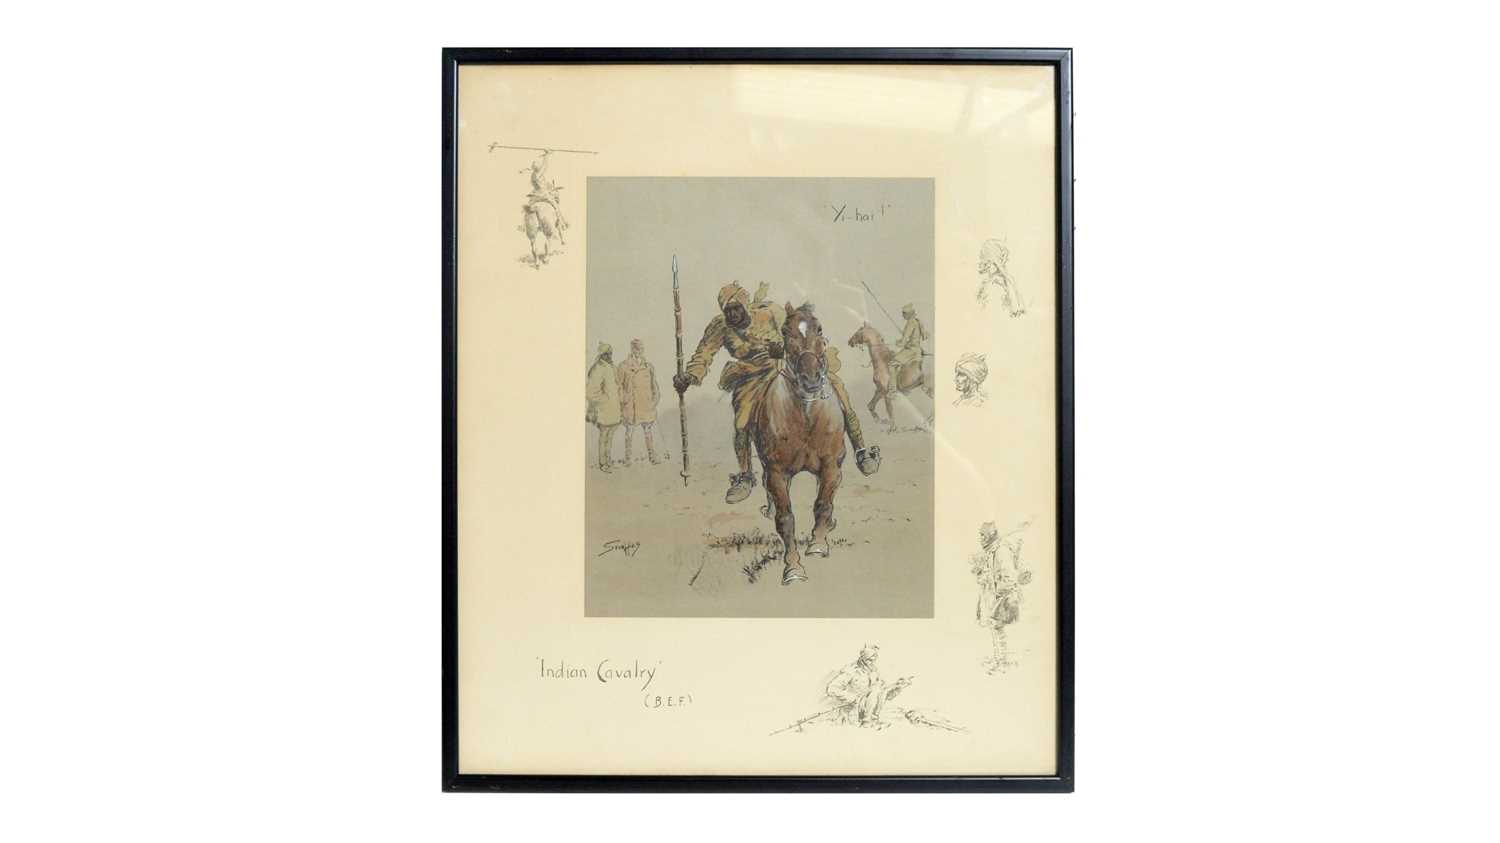 Lot 1022 - "Snaffles" Charles Johnson Payne - Indian Cavalry (B.E.F) | hand-tinted lithograph